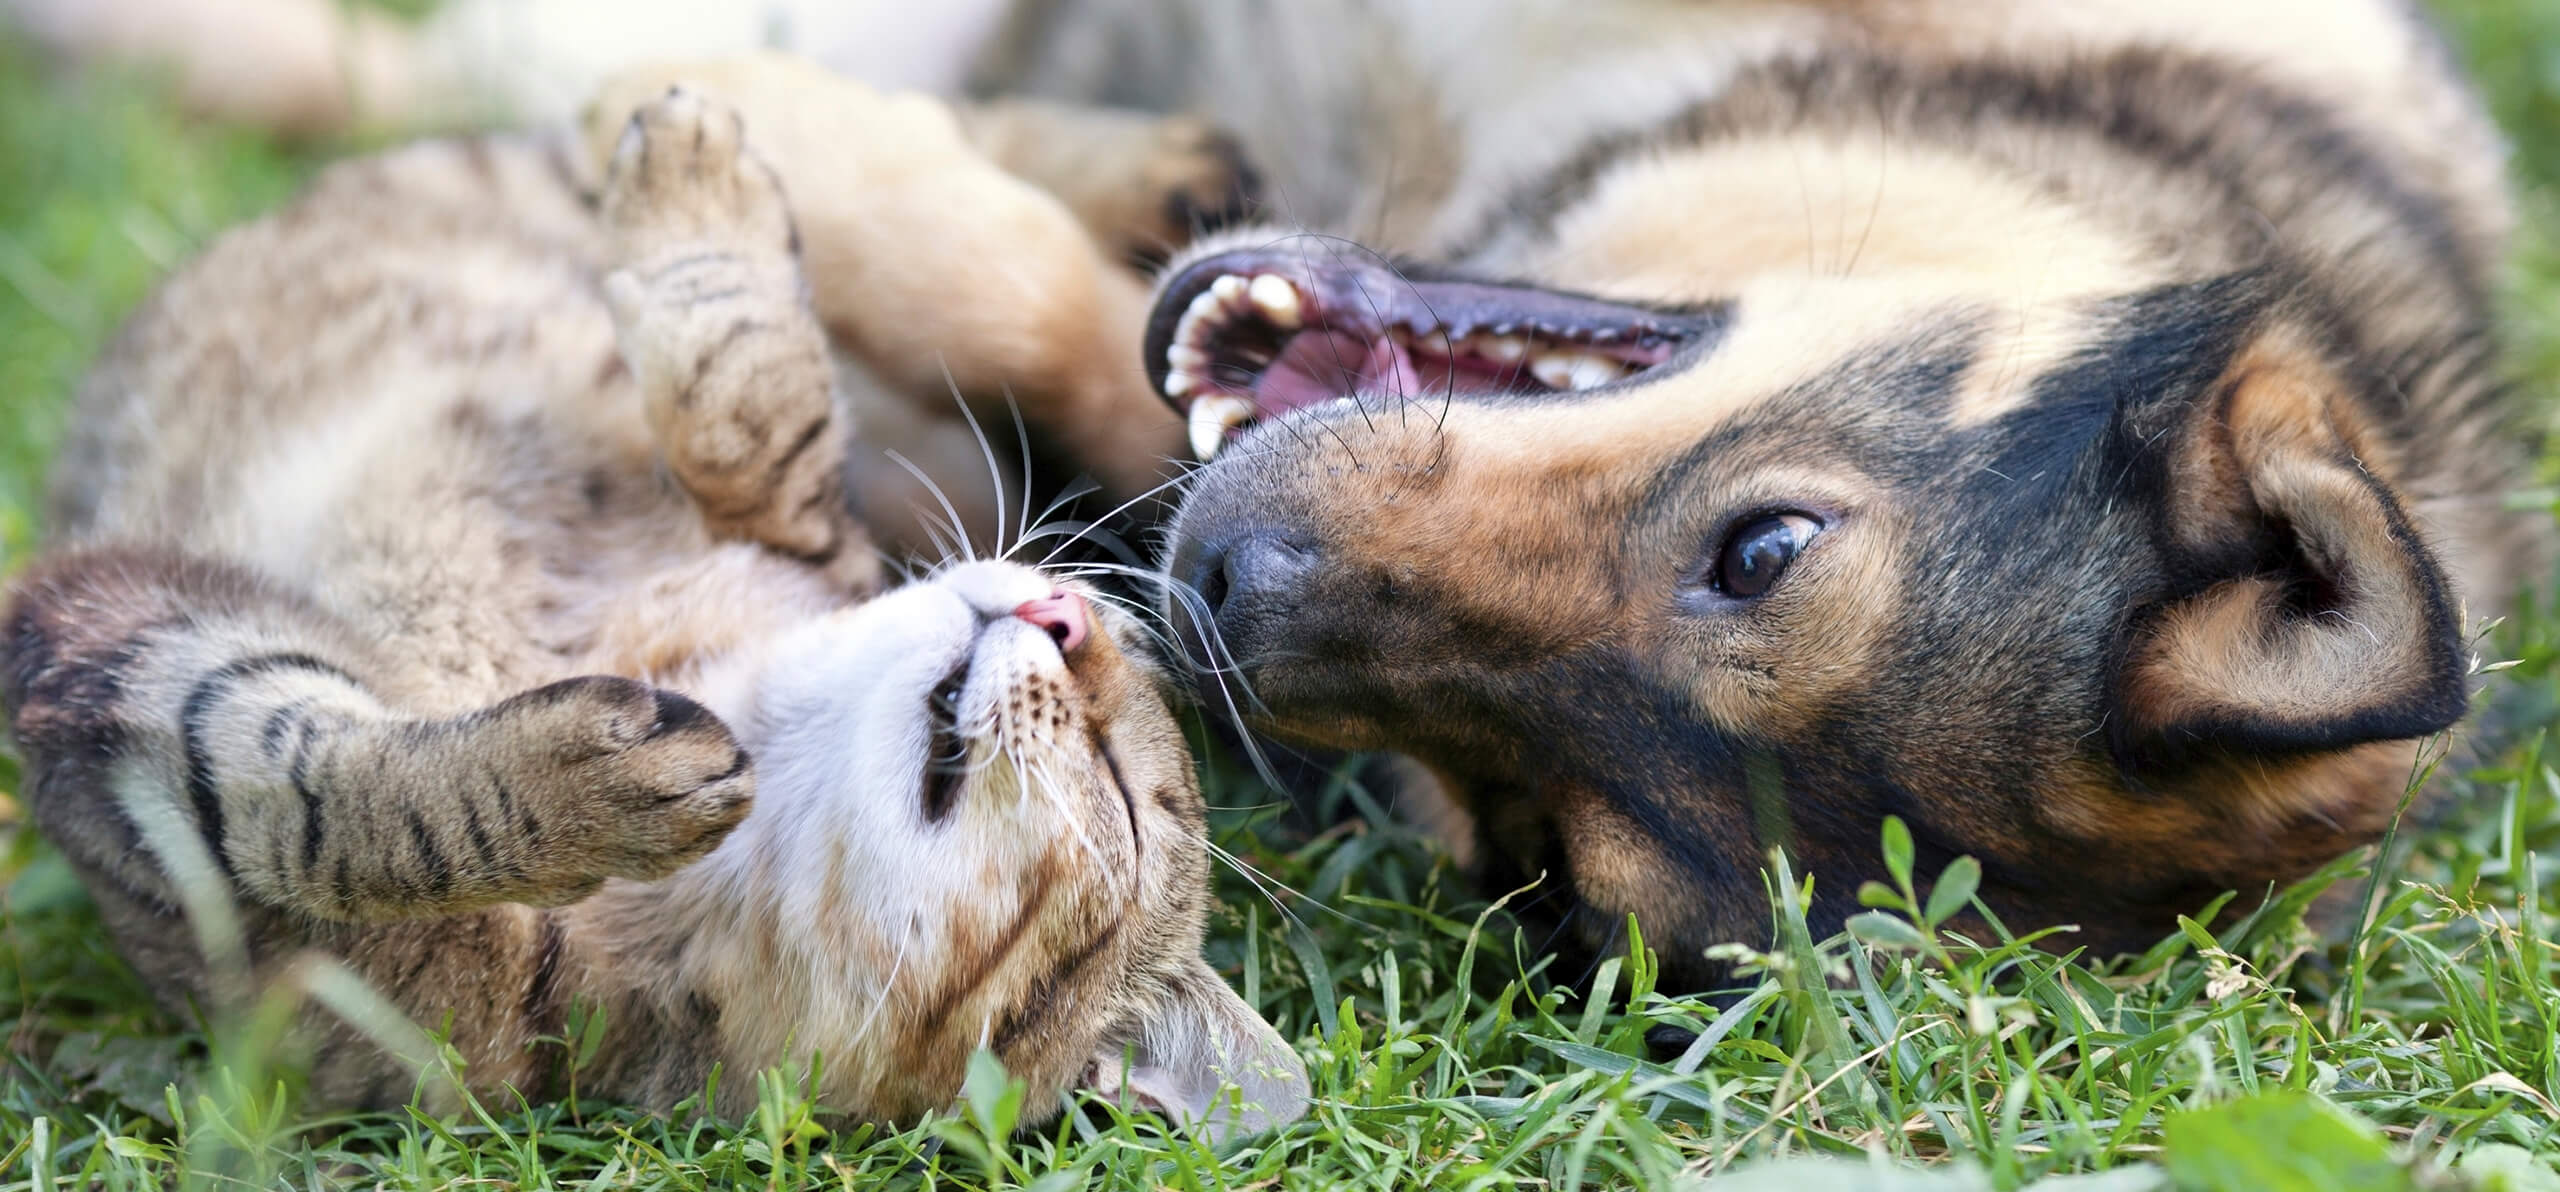 cat and dog laying upside down smiling at each other